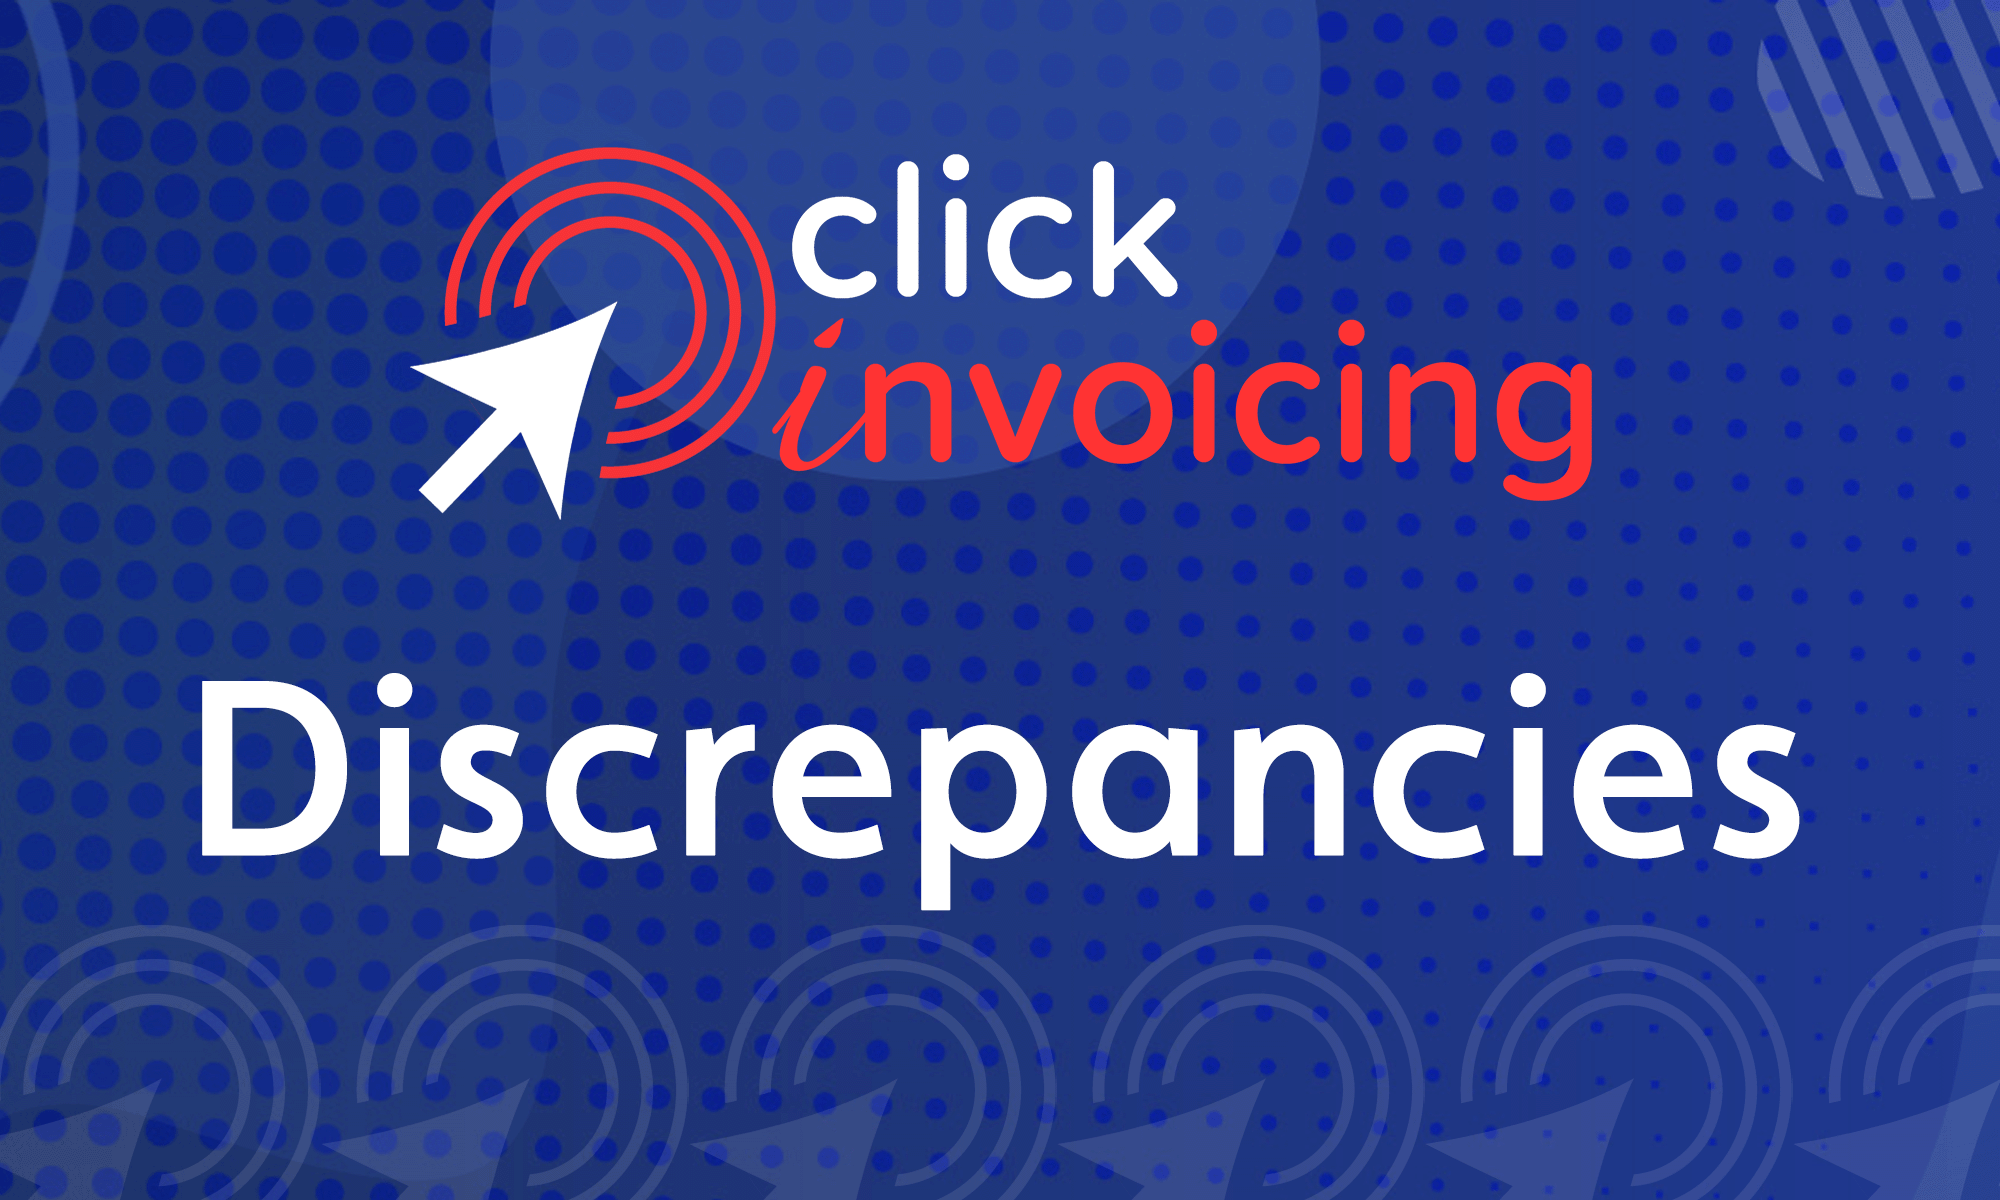 Featured image for “Click Invoicing Discrepancies”